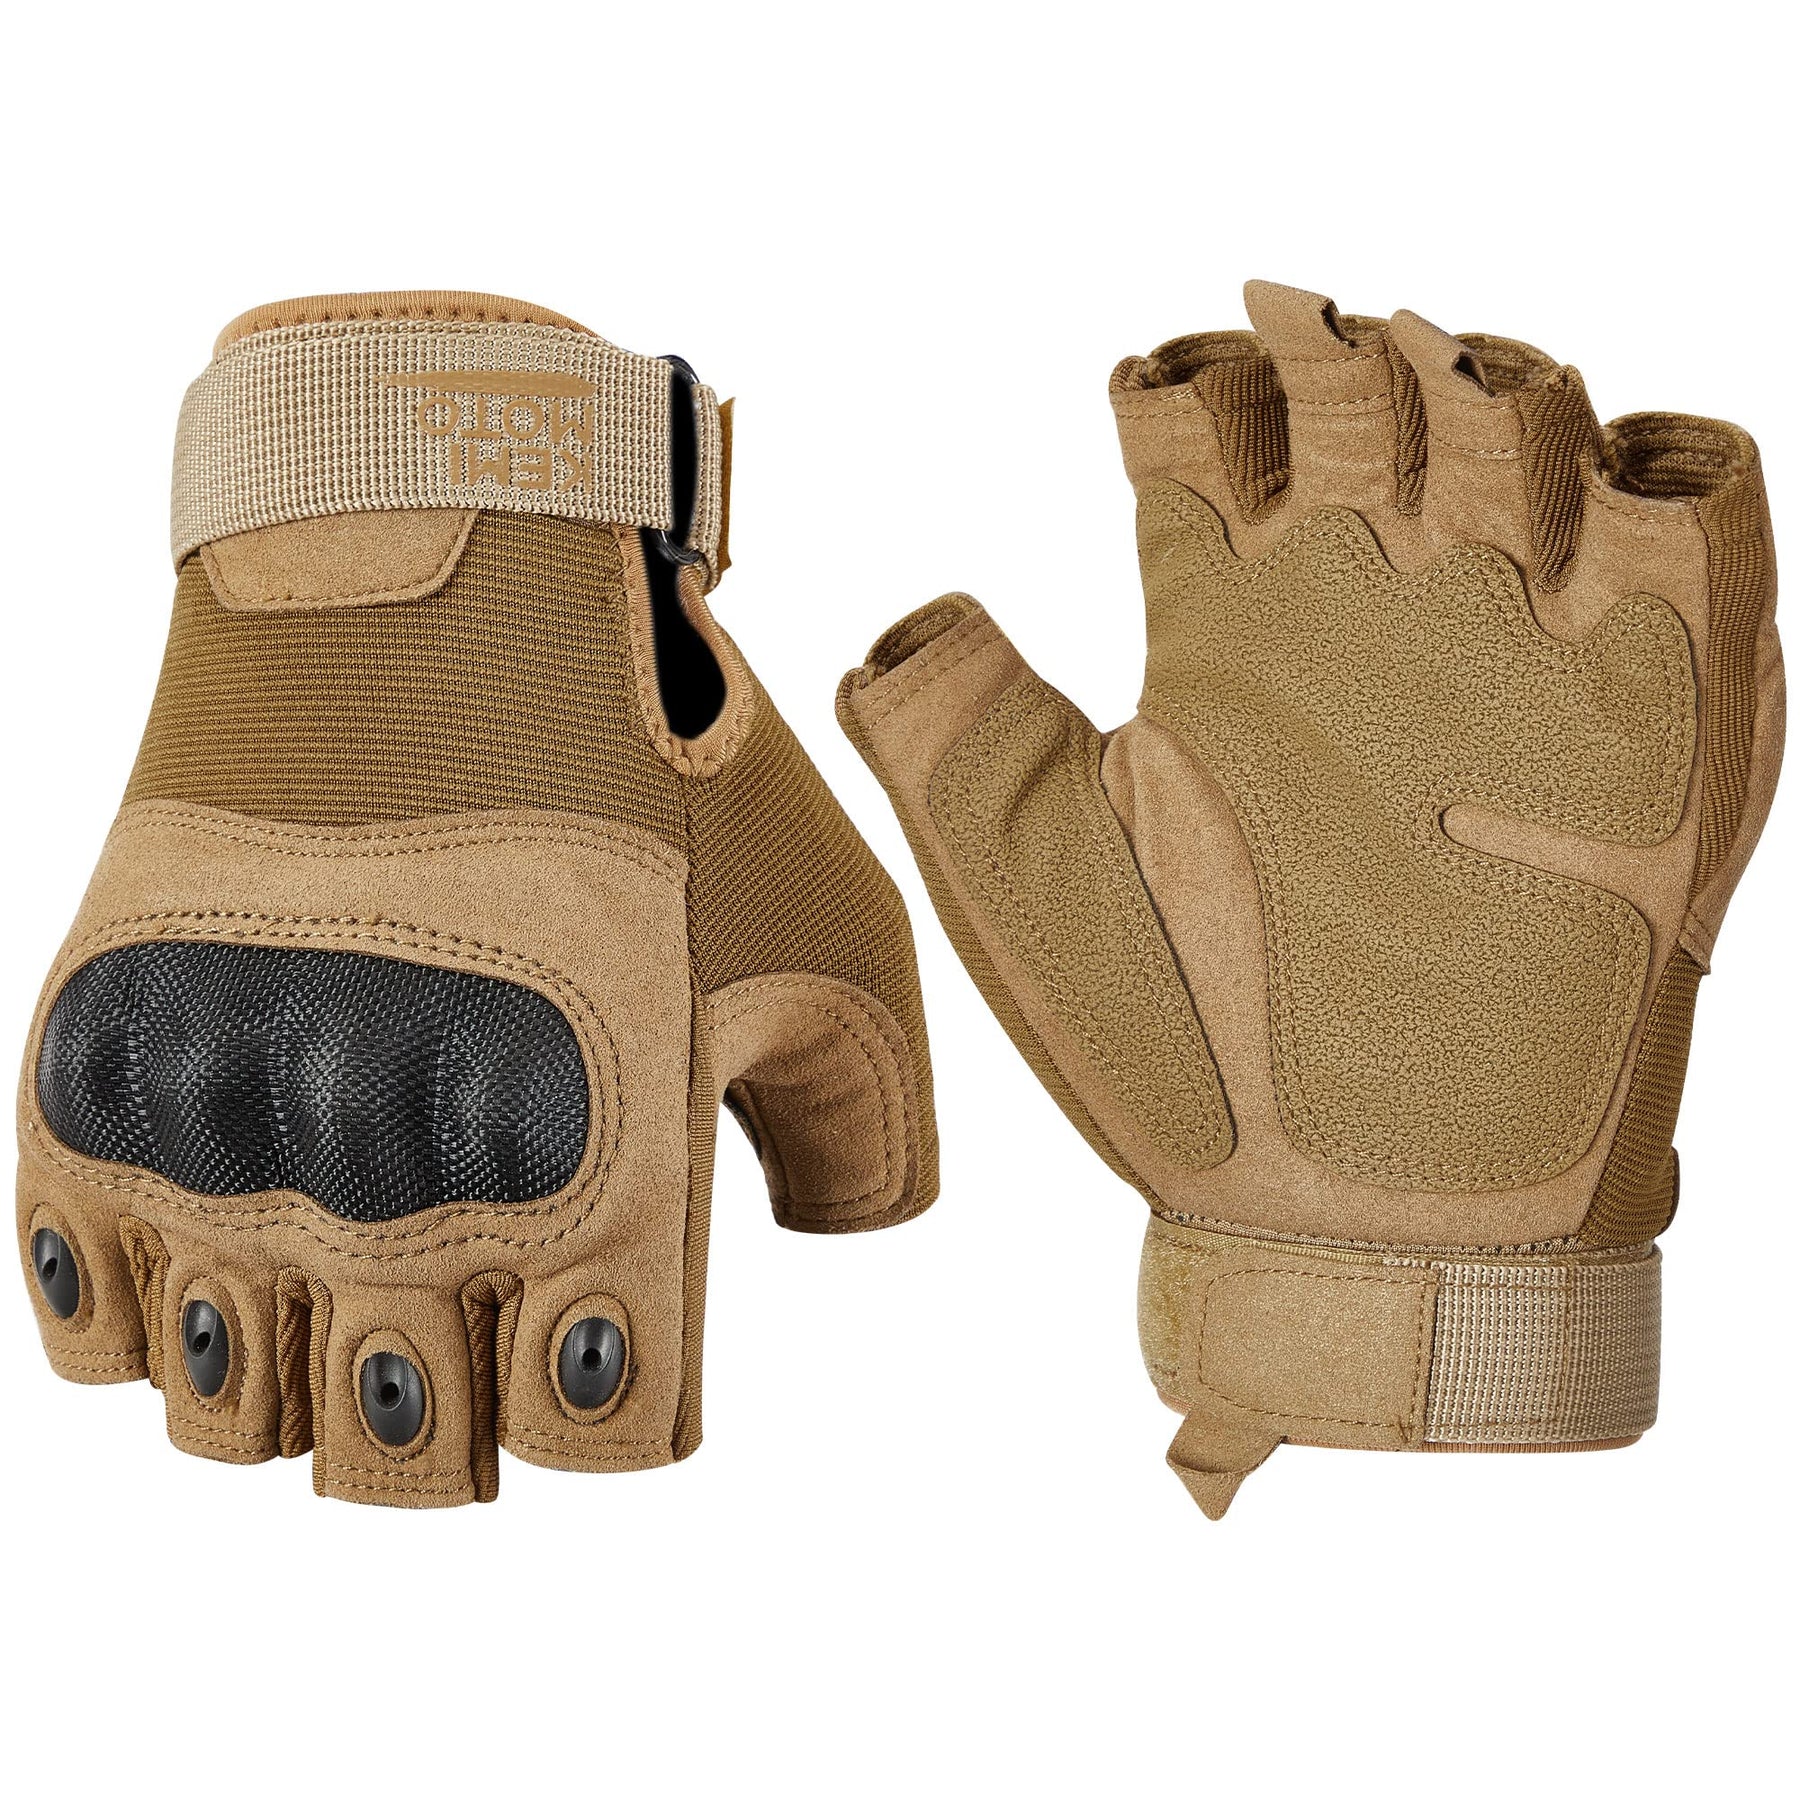 Fingerless Motorcycle Gloves for Training Shooting Hunting Hiking